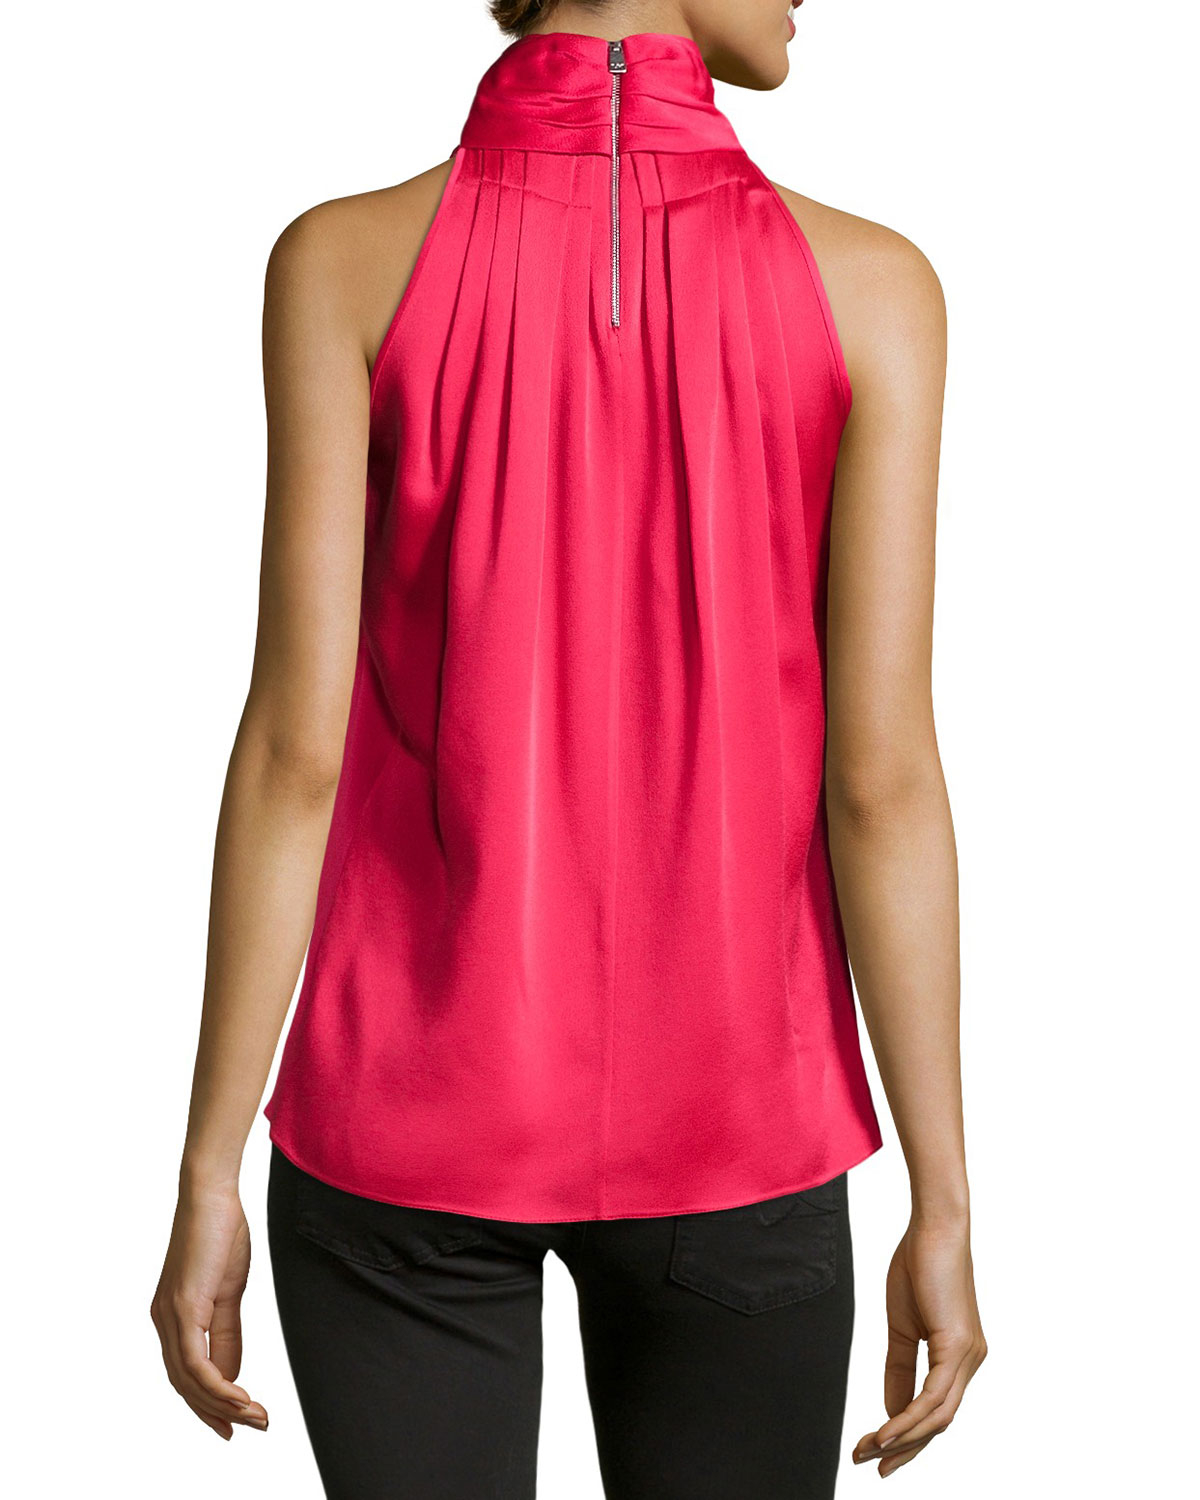 Lyst Michael Kors High  Neck  Charmeuse Halter  Top  in Pink